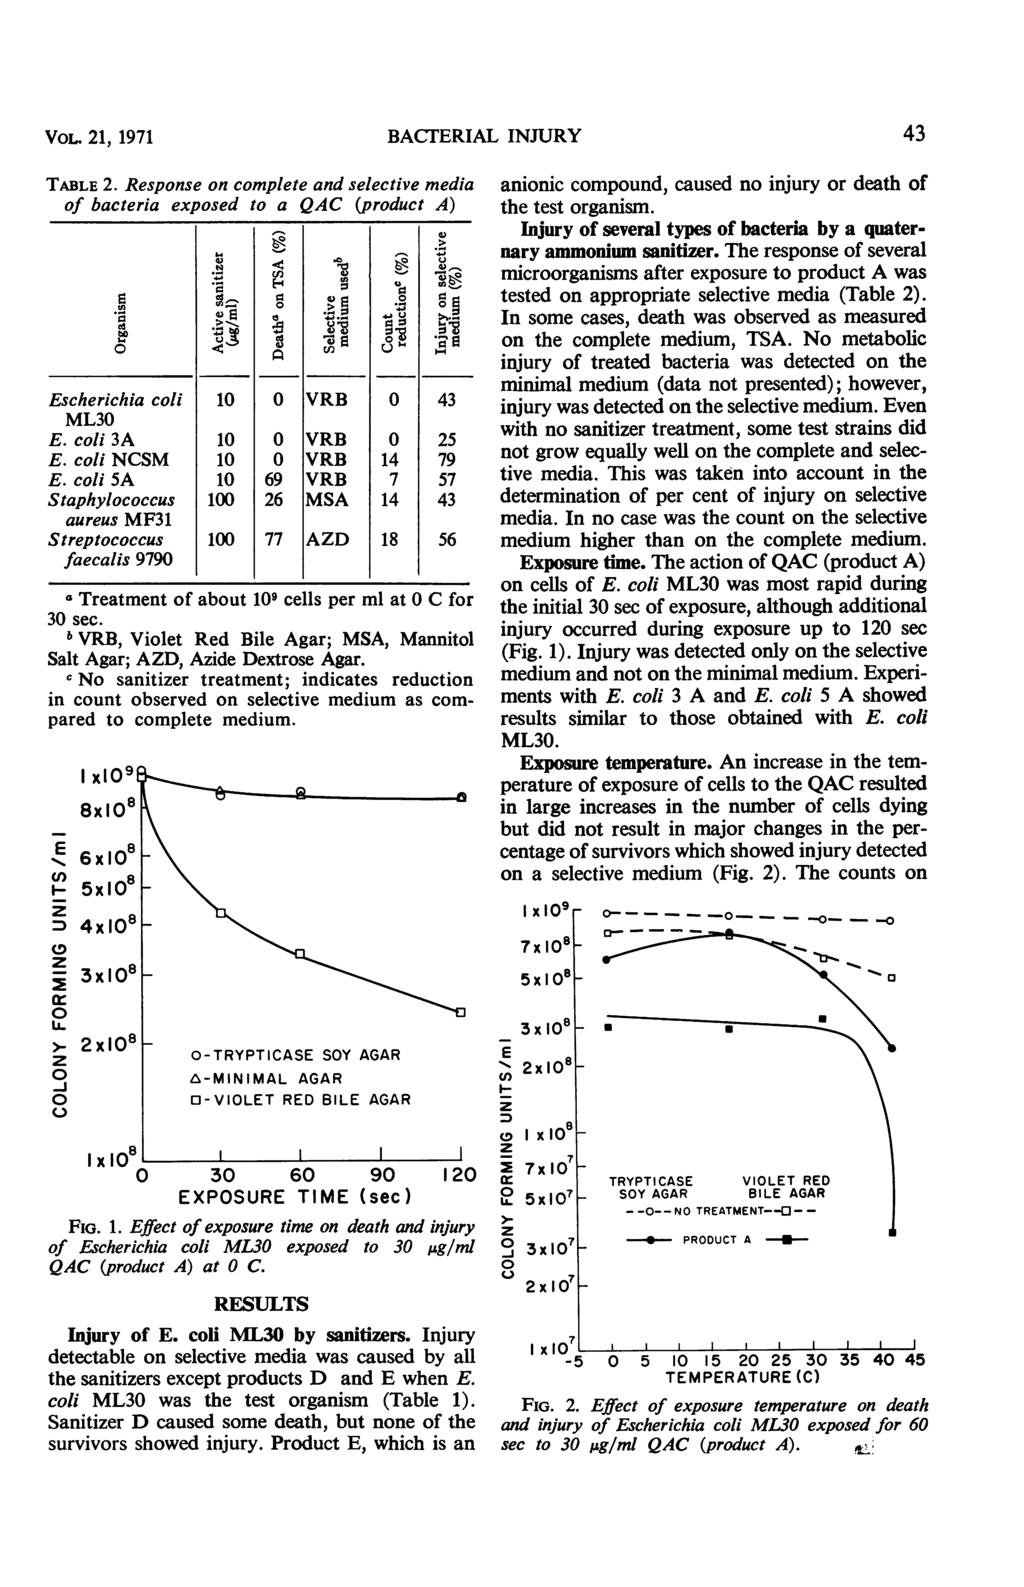 VOL. 21, 1971 BACTRIAL INJURY TABL 2. Response on complete and selective media of bacteria exposed to a QAC (product A) F. scherichia coli ML3. coli 3A. coli NCSM.